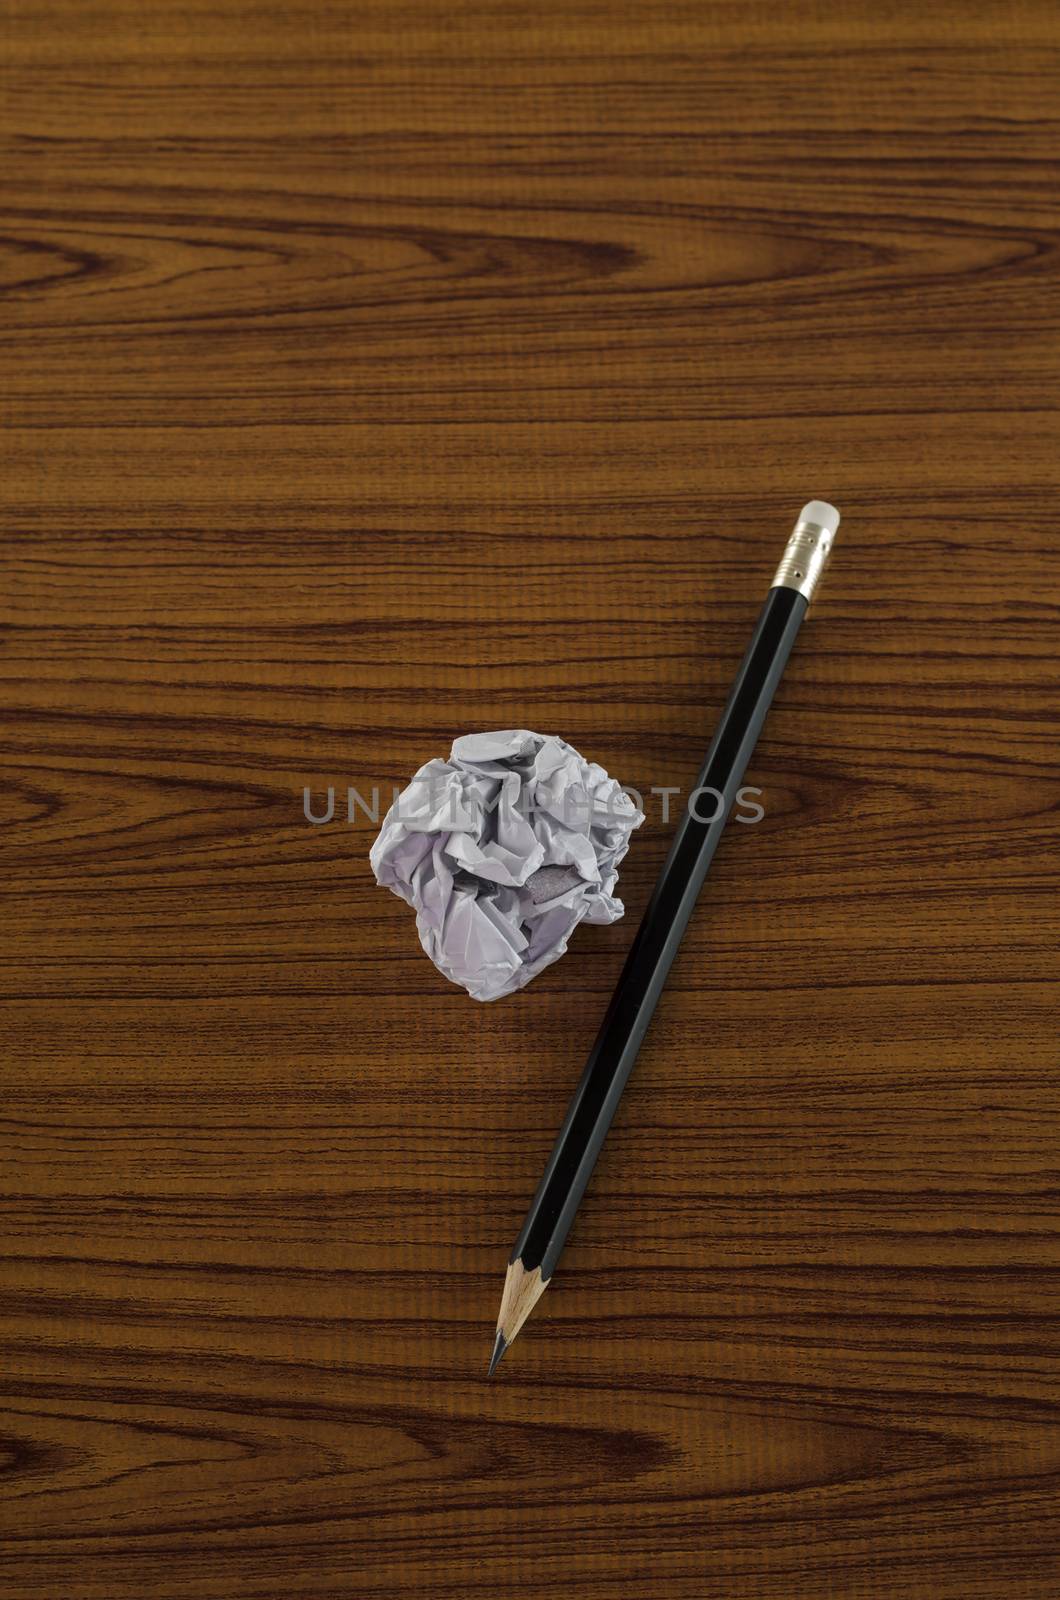 crumpled paper and pencil  by ammza12